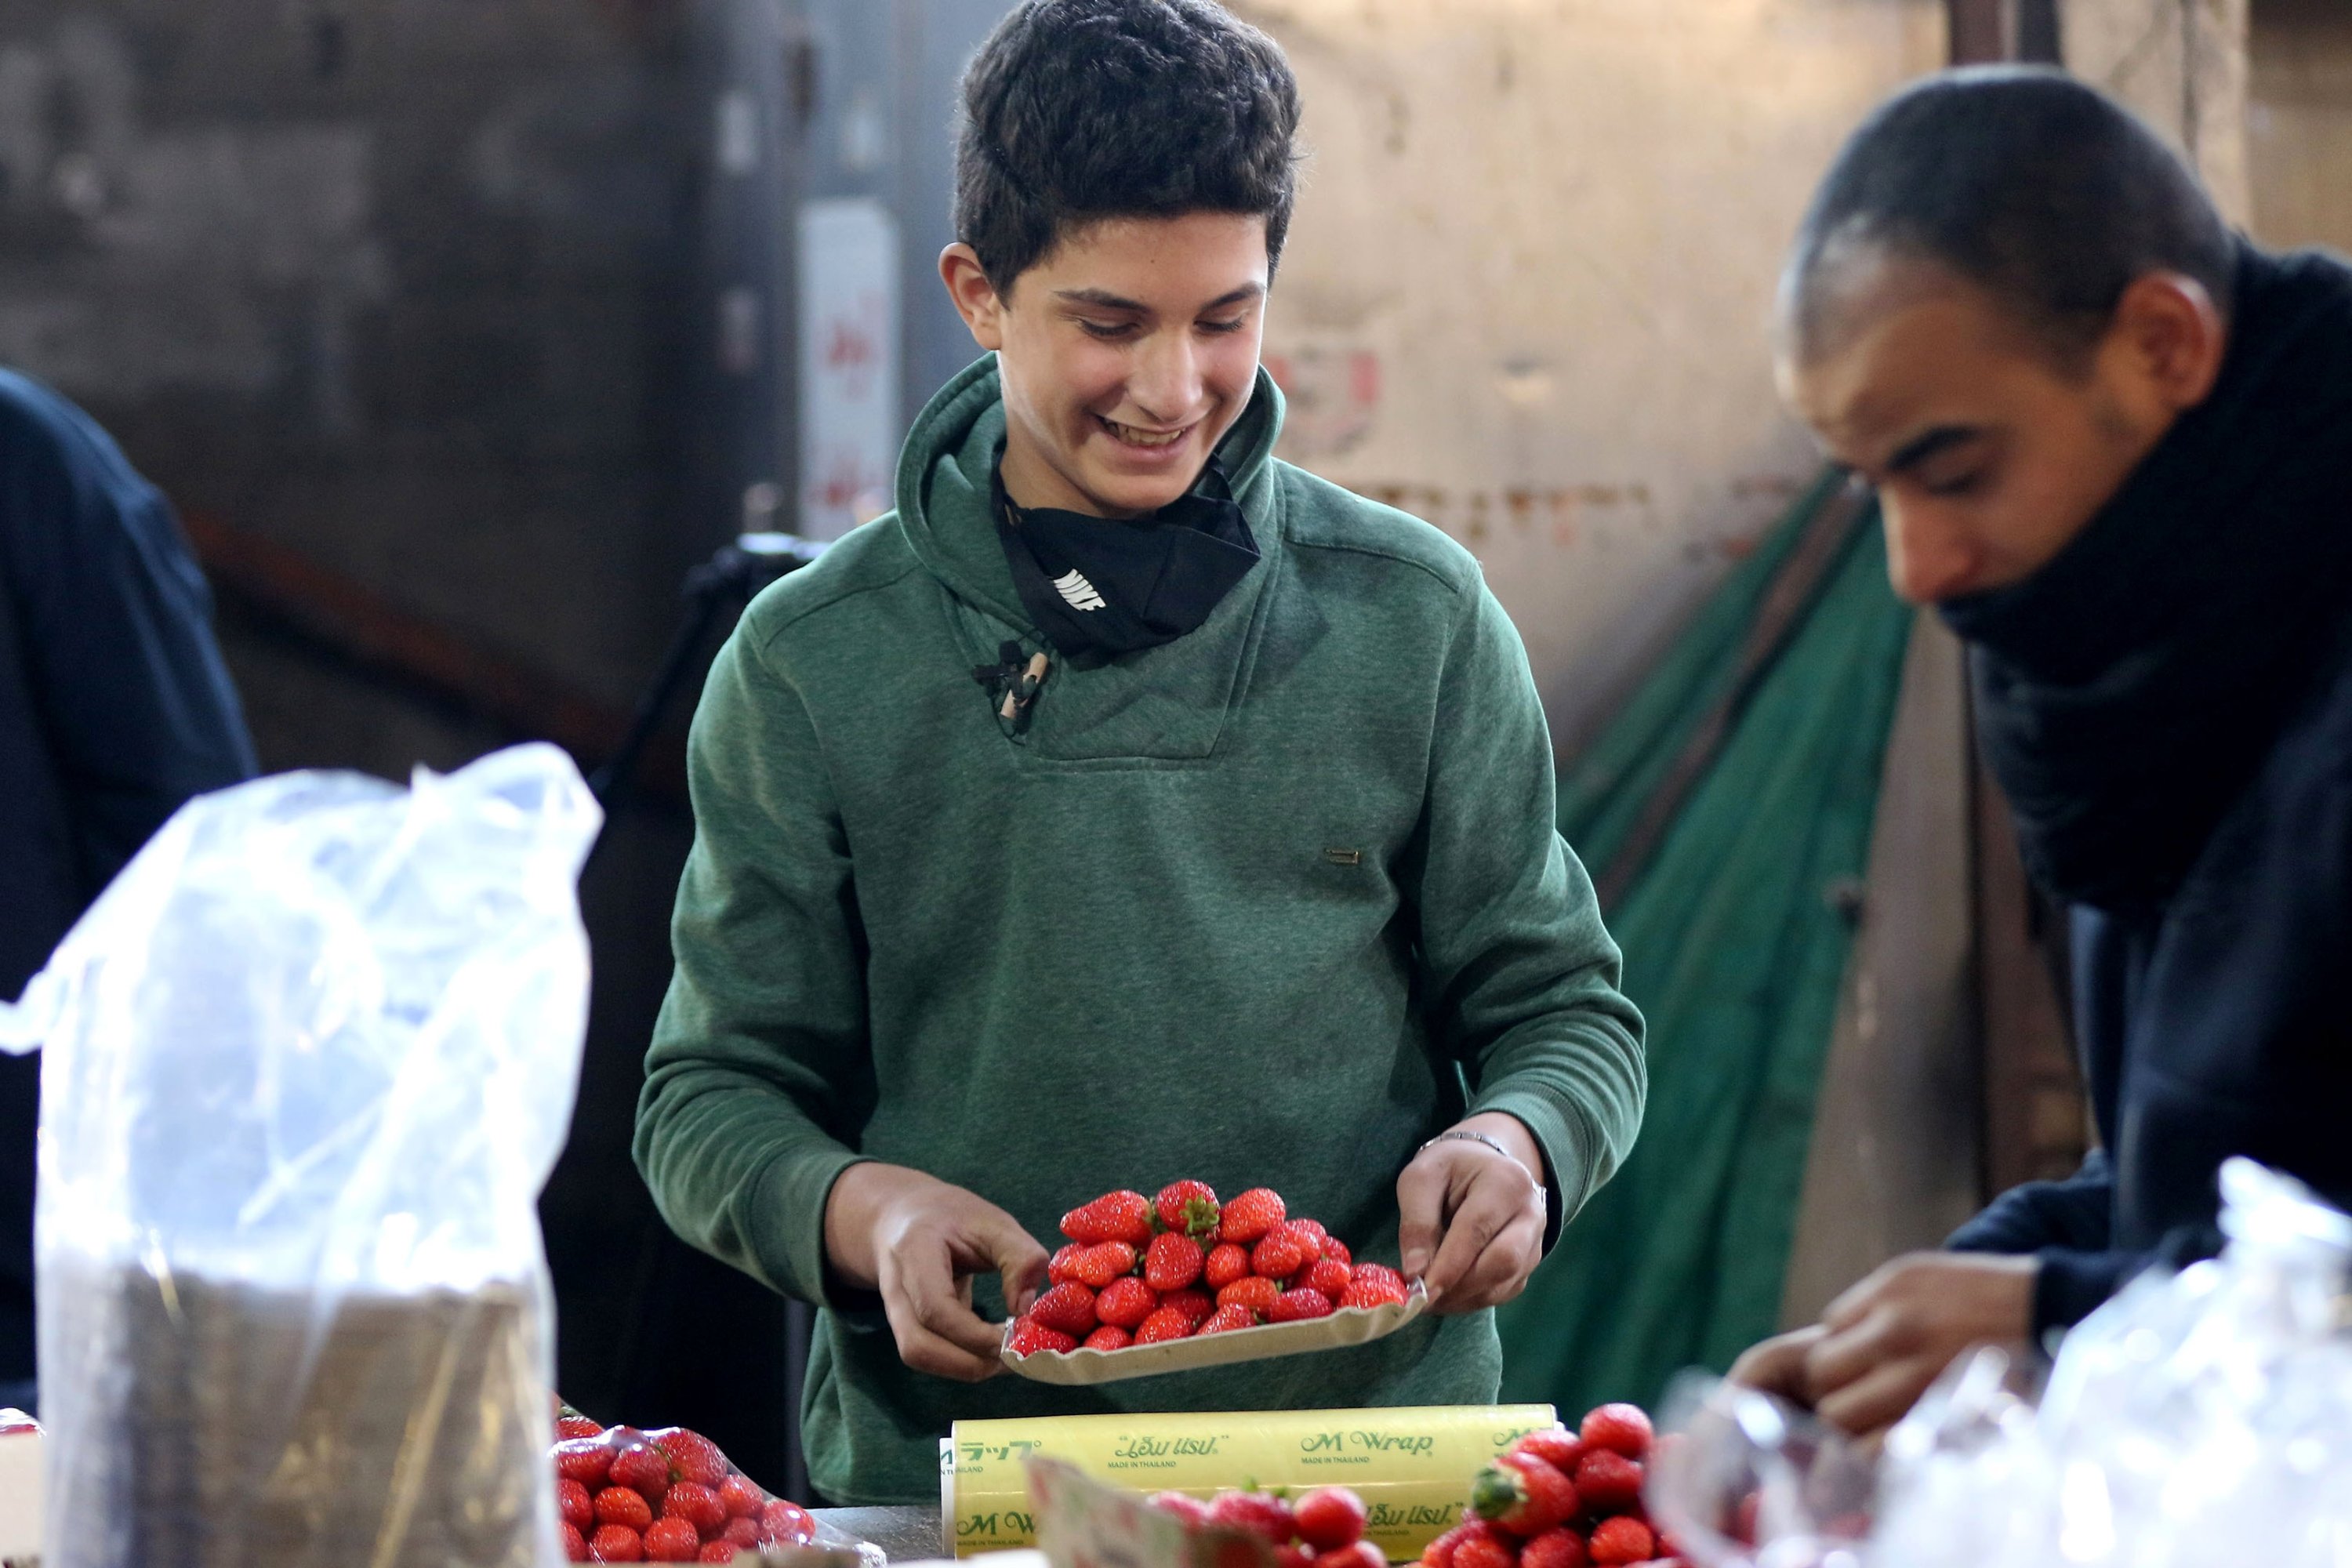 Mohammad, 14, arrange strawberry boxes in one of Amman’s popular vegetable and fruit markets, Jordan, Jan 10, 2021. (Photo: AFP)